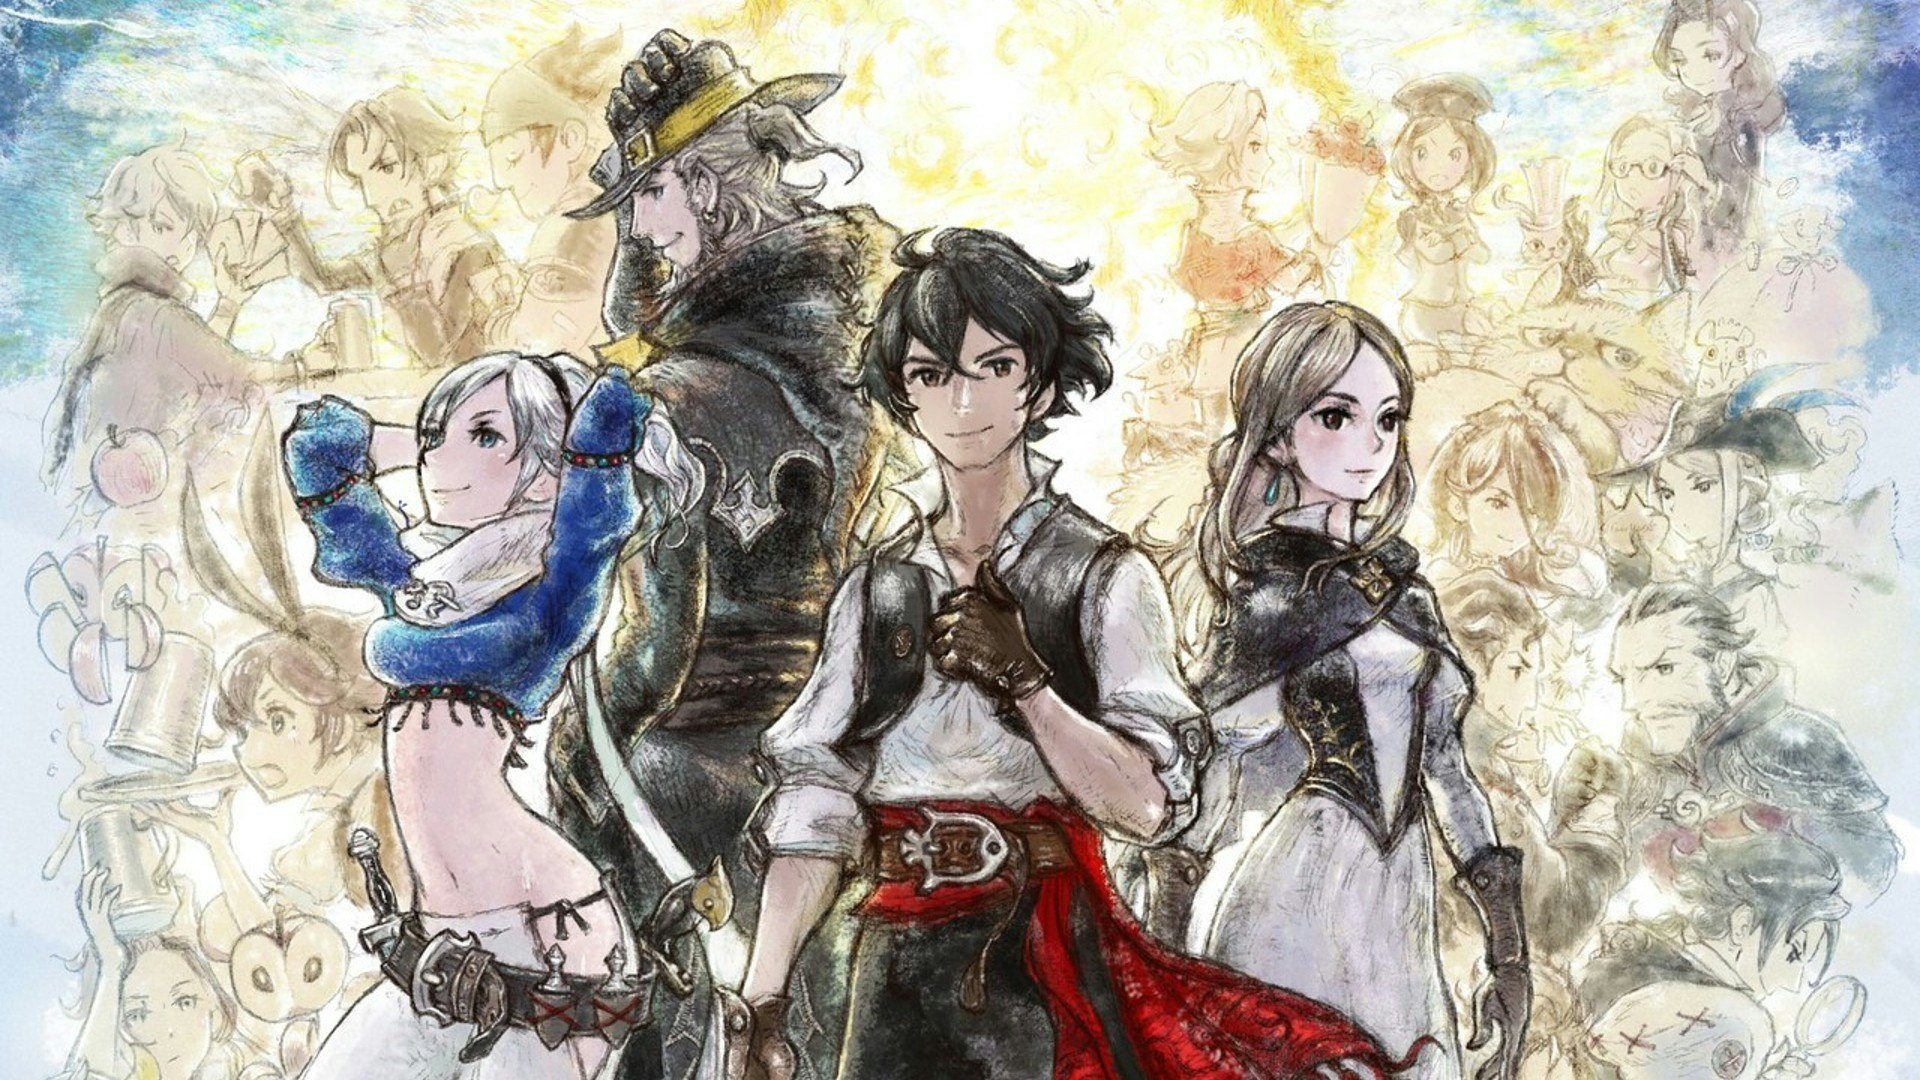 Bravely Default 2' review: An excellent 3DS game 10 years too late